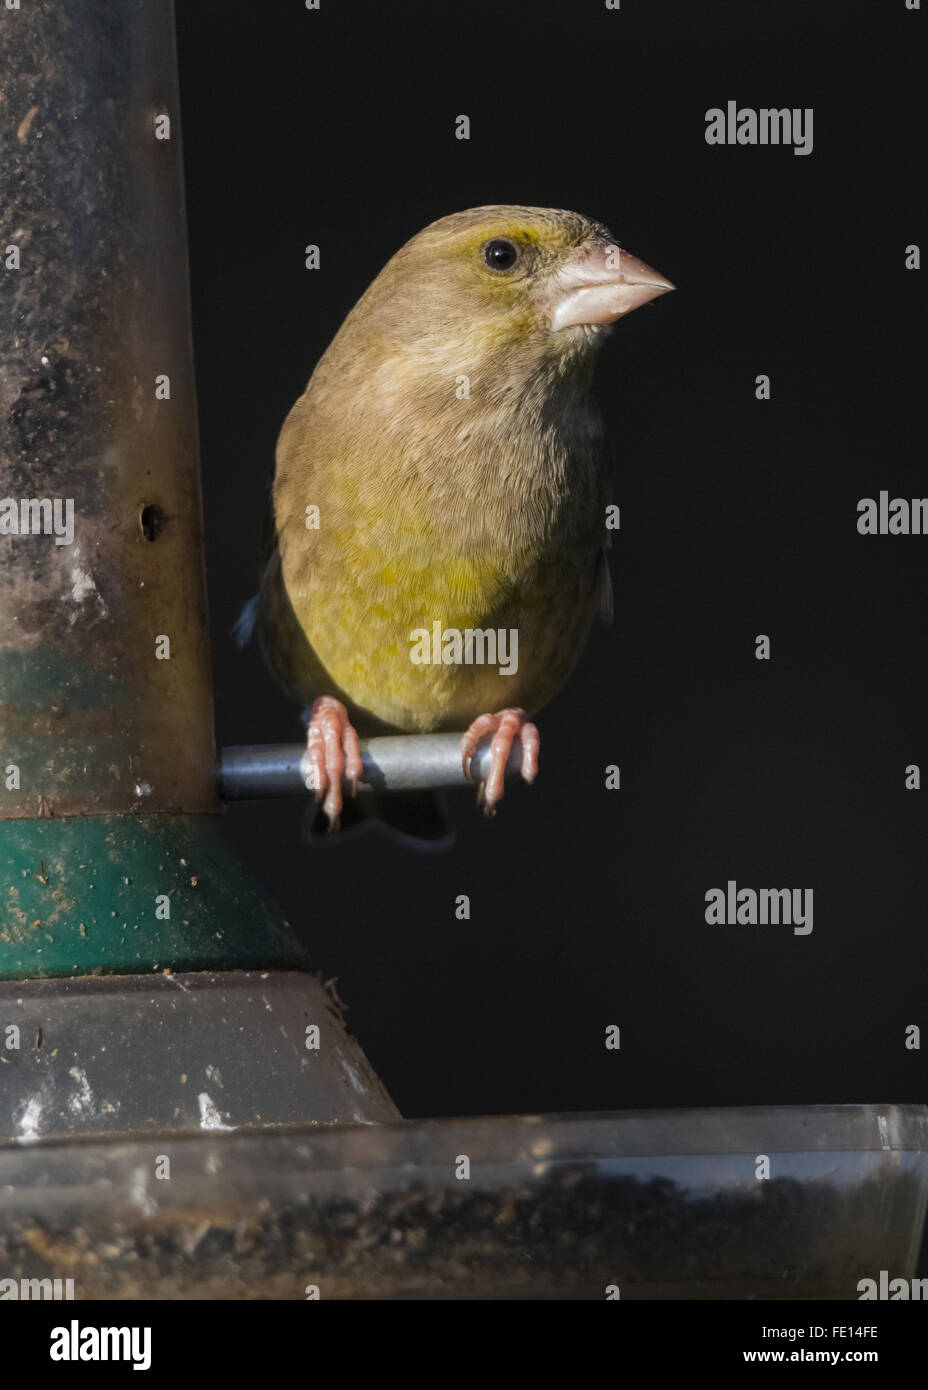 Greenfinch on nyger seed feeder in Mainsriddle, near RSPB Mersehead, Dumfries and Galloway, Scotland, UK Stock Photo